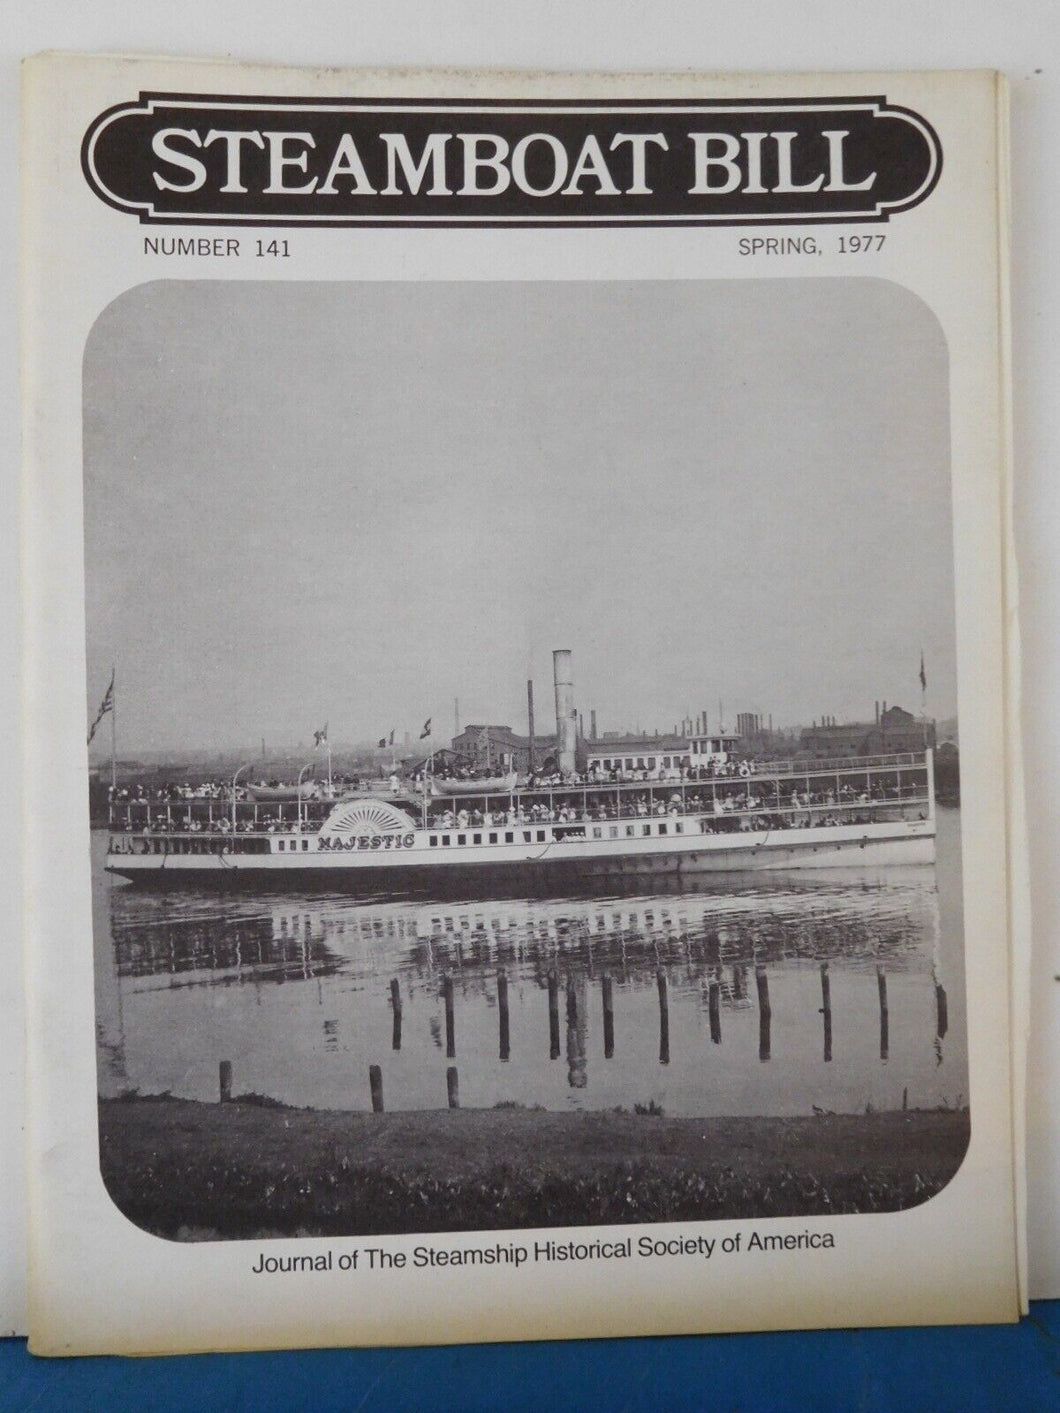 Steamboat Bill #141 Spring 1977 Journal of the Steamship Historical Society